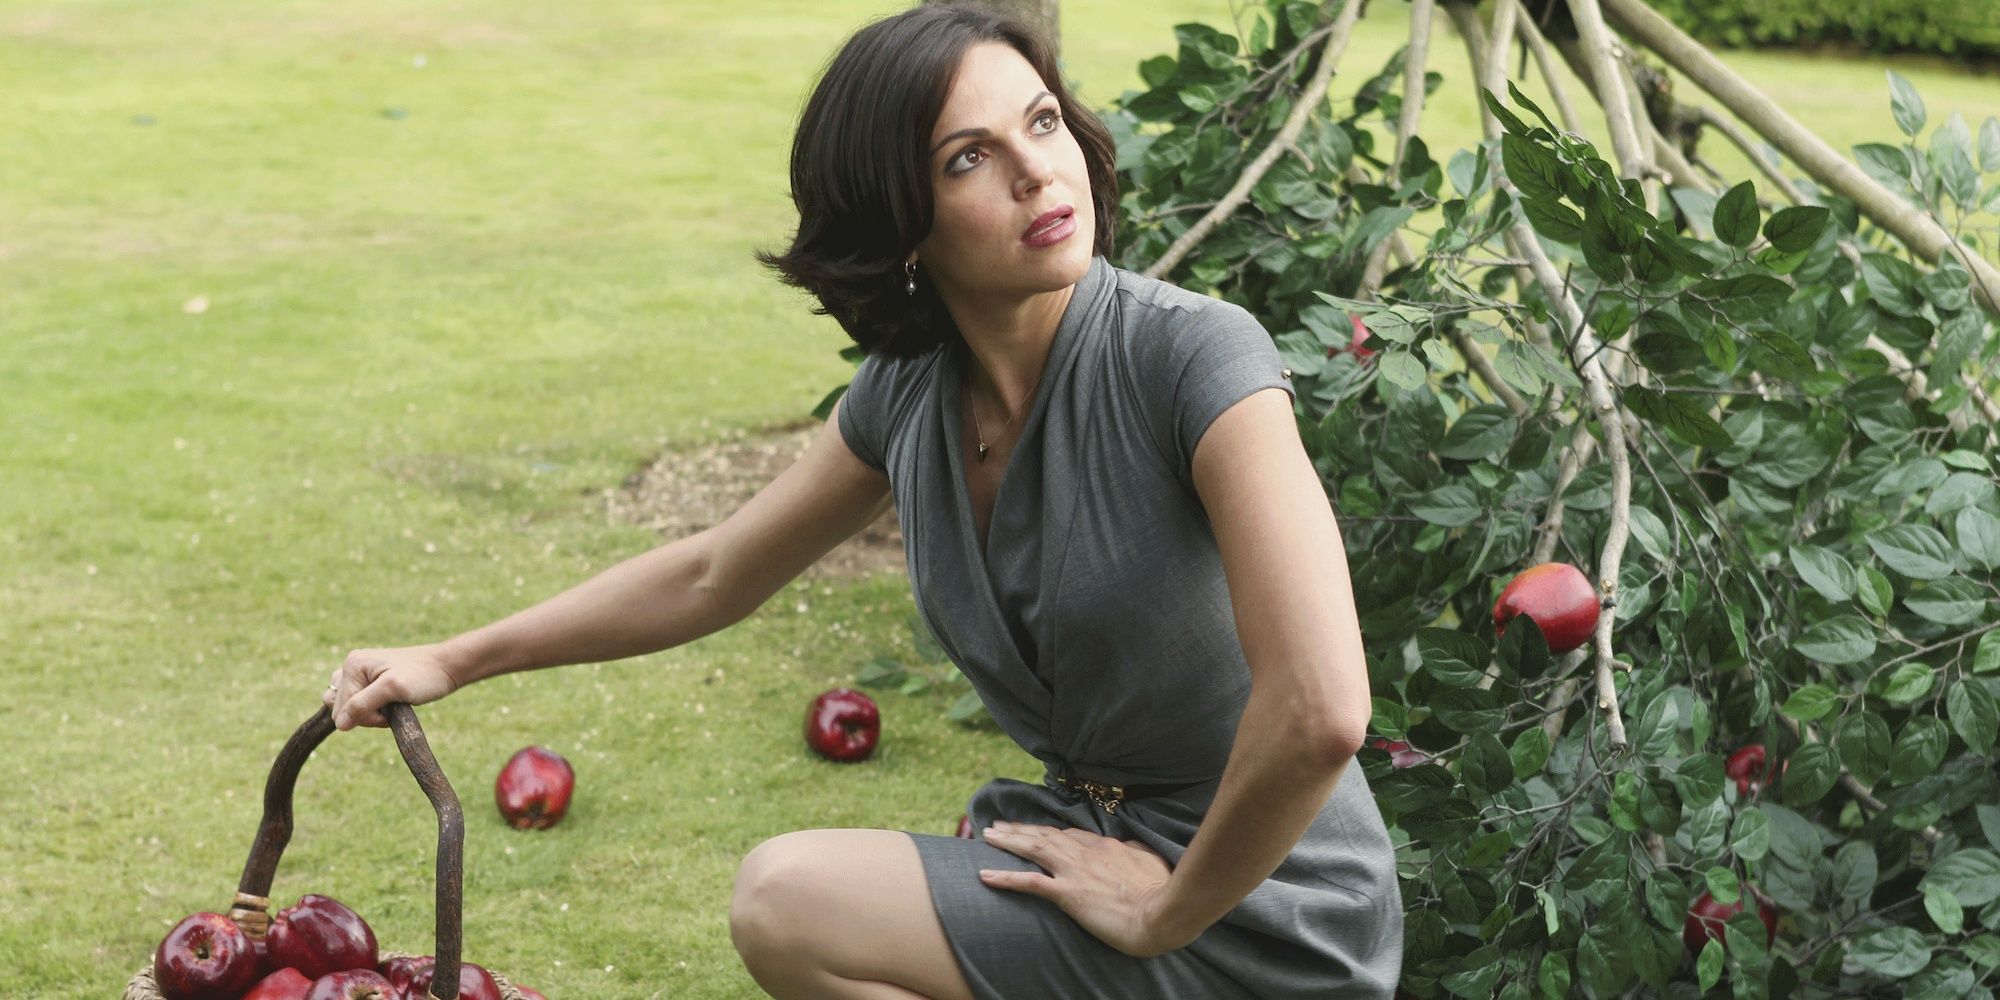 Regina Mills picking apples in Once Upon A Time.